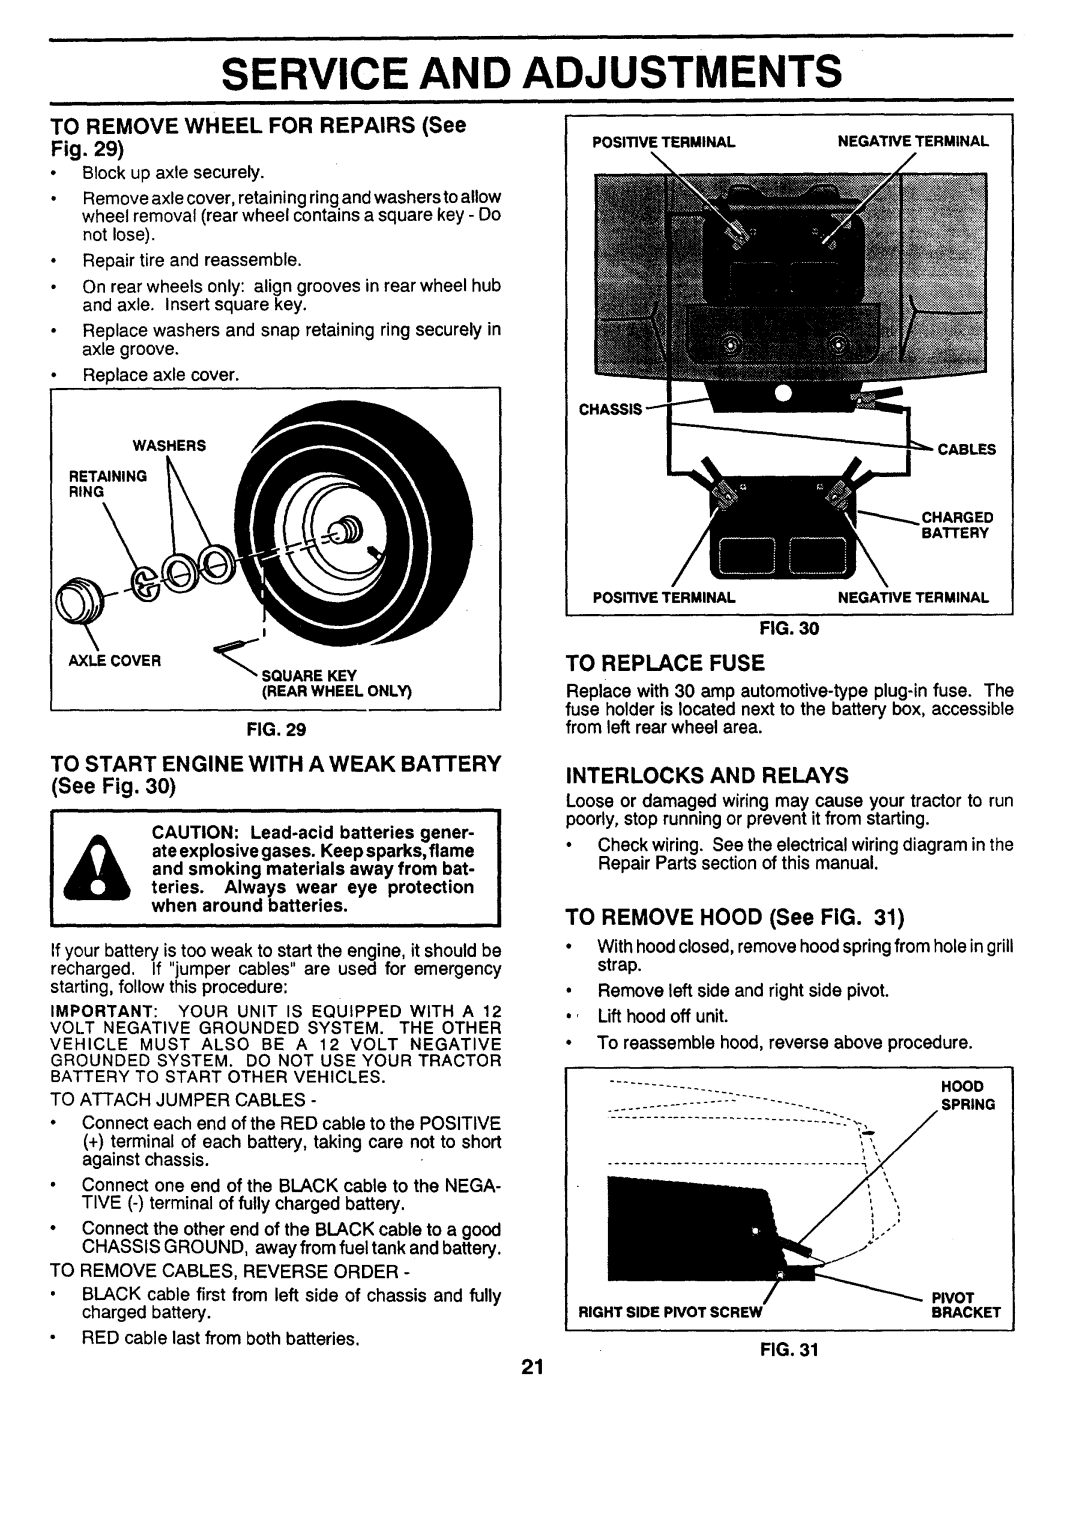 Sears 917.257462 TO START ENGINE WITH A WEAK BATTERY See Fig, TO REMOVE HOOD See FIG, TO REMOVE WHEEL FOR REPAIRS See Fig 